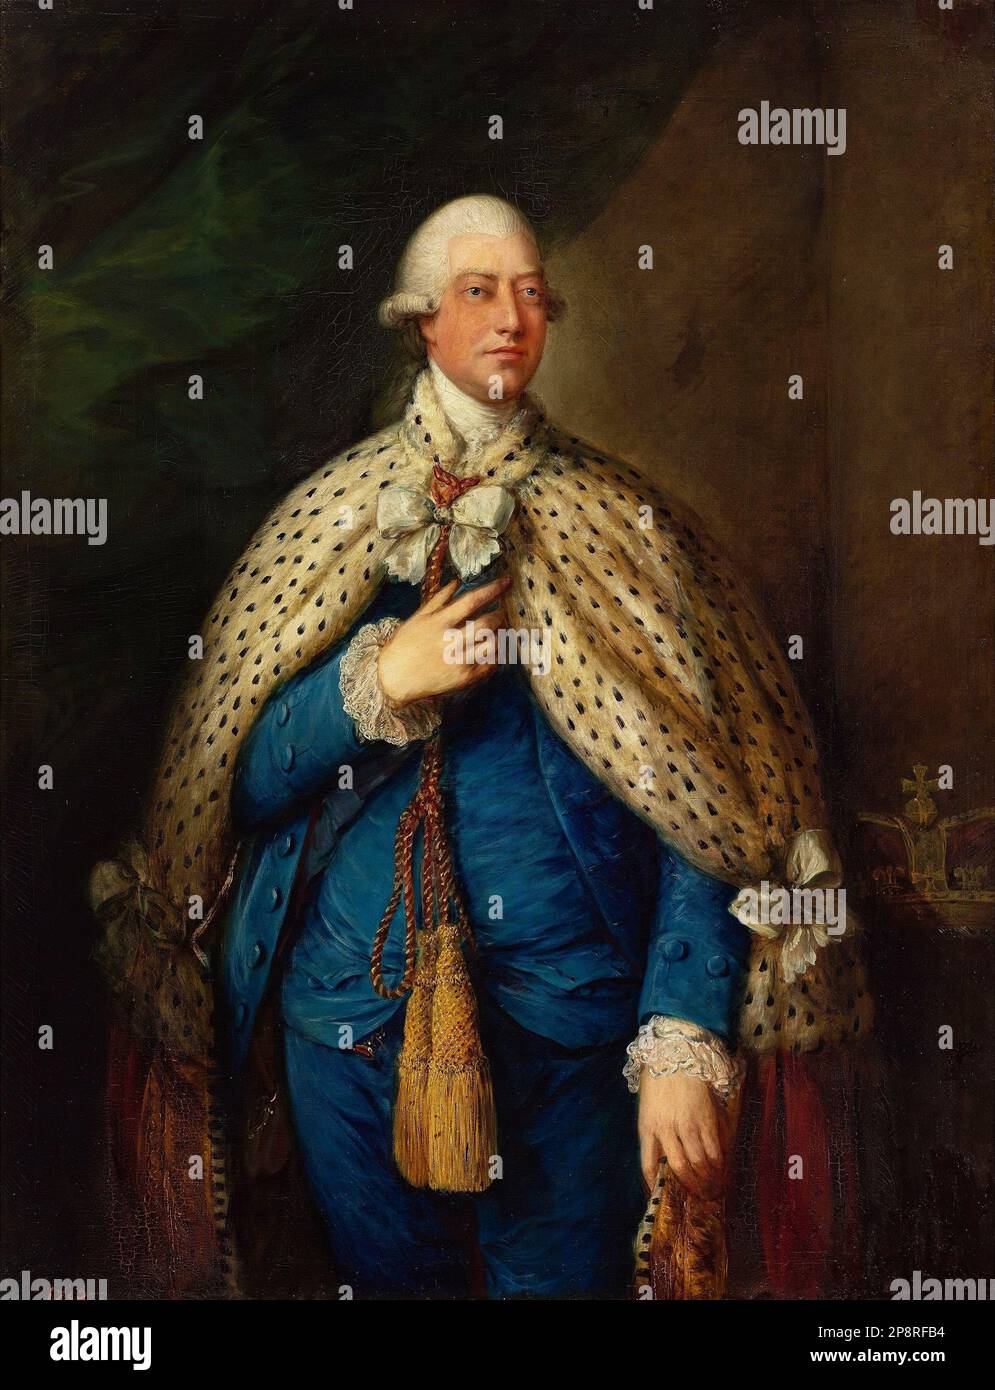 Portrait of George III of the United Kingdom in parliamentary robes 1785 by Thomas Gainsborough Stock Photo